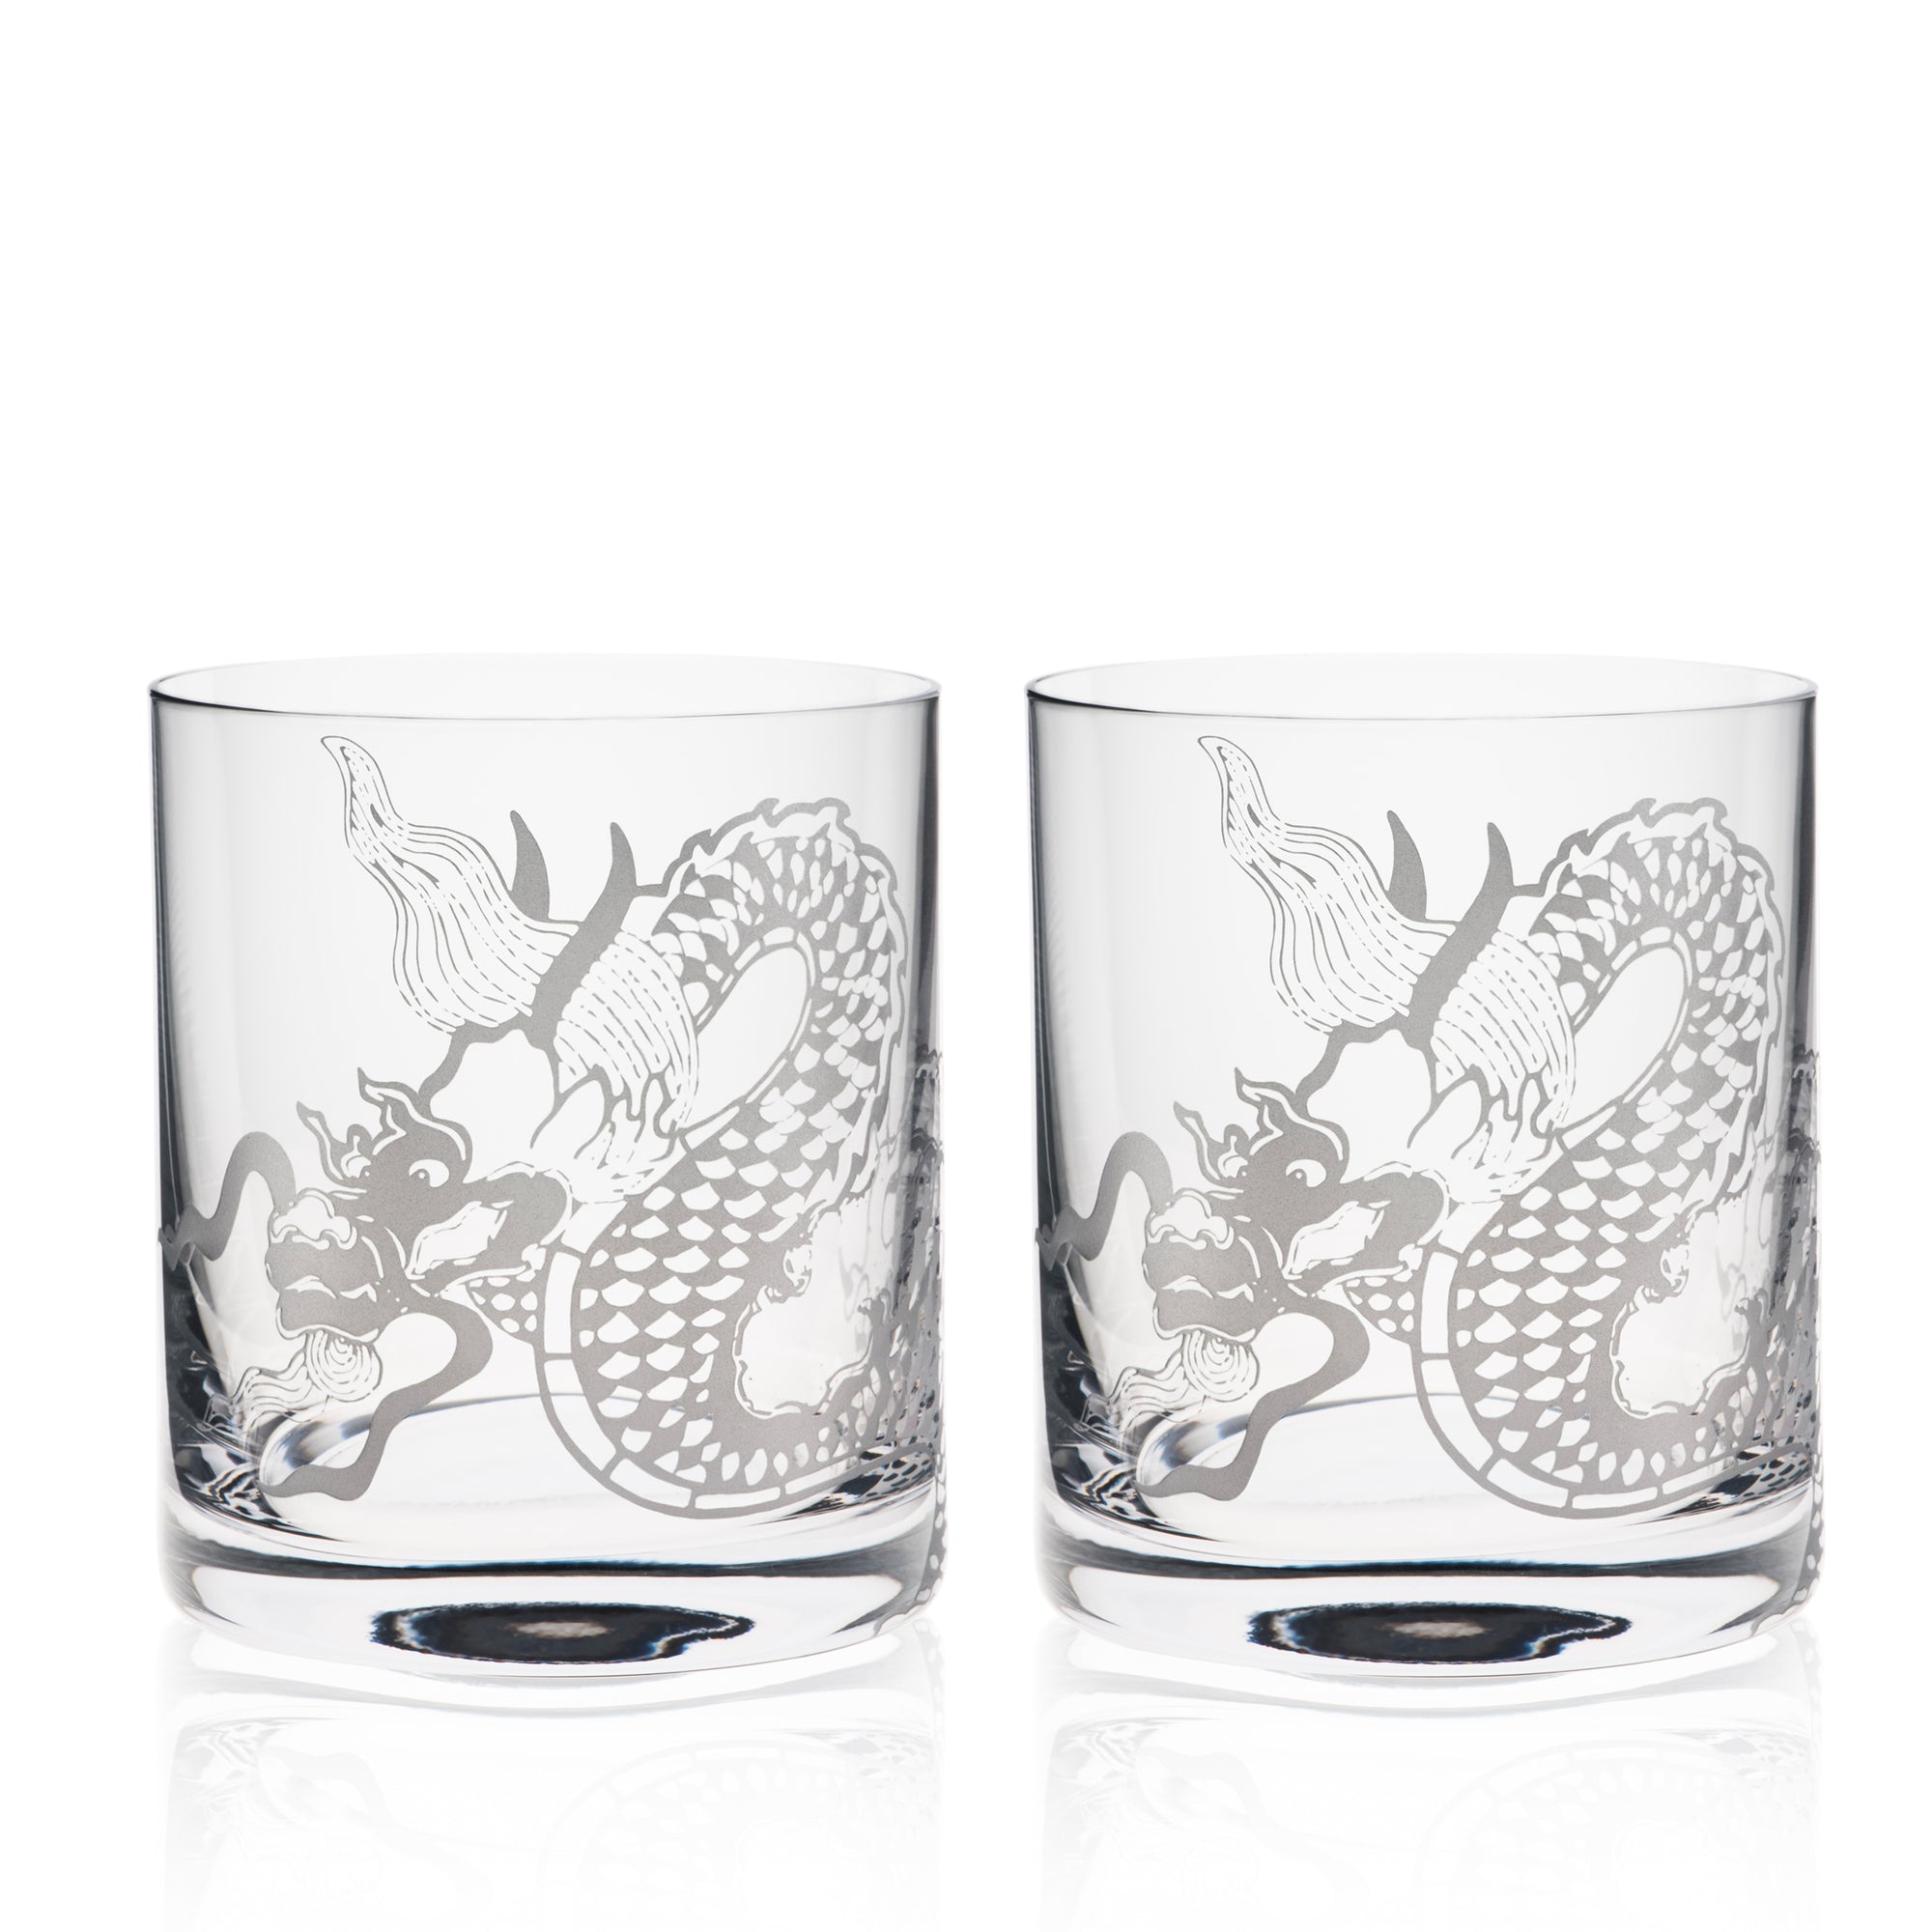 Dragon sand-etched pattern on-the-rocks cocktail glasses in a set of 2 from Caskata